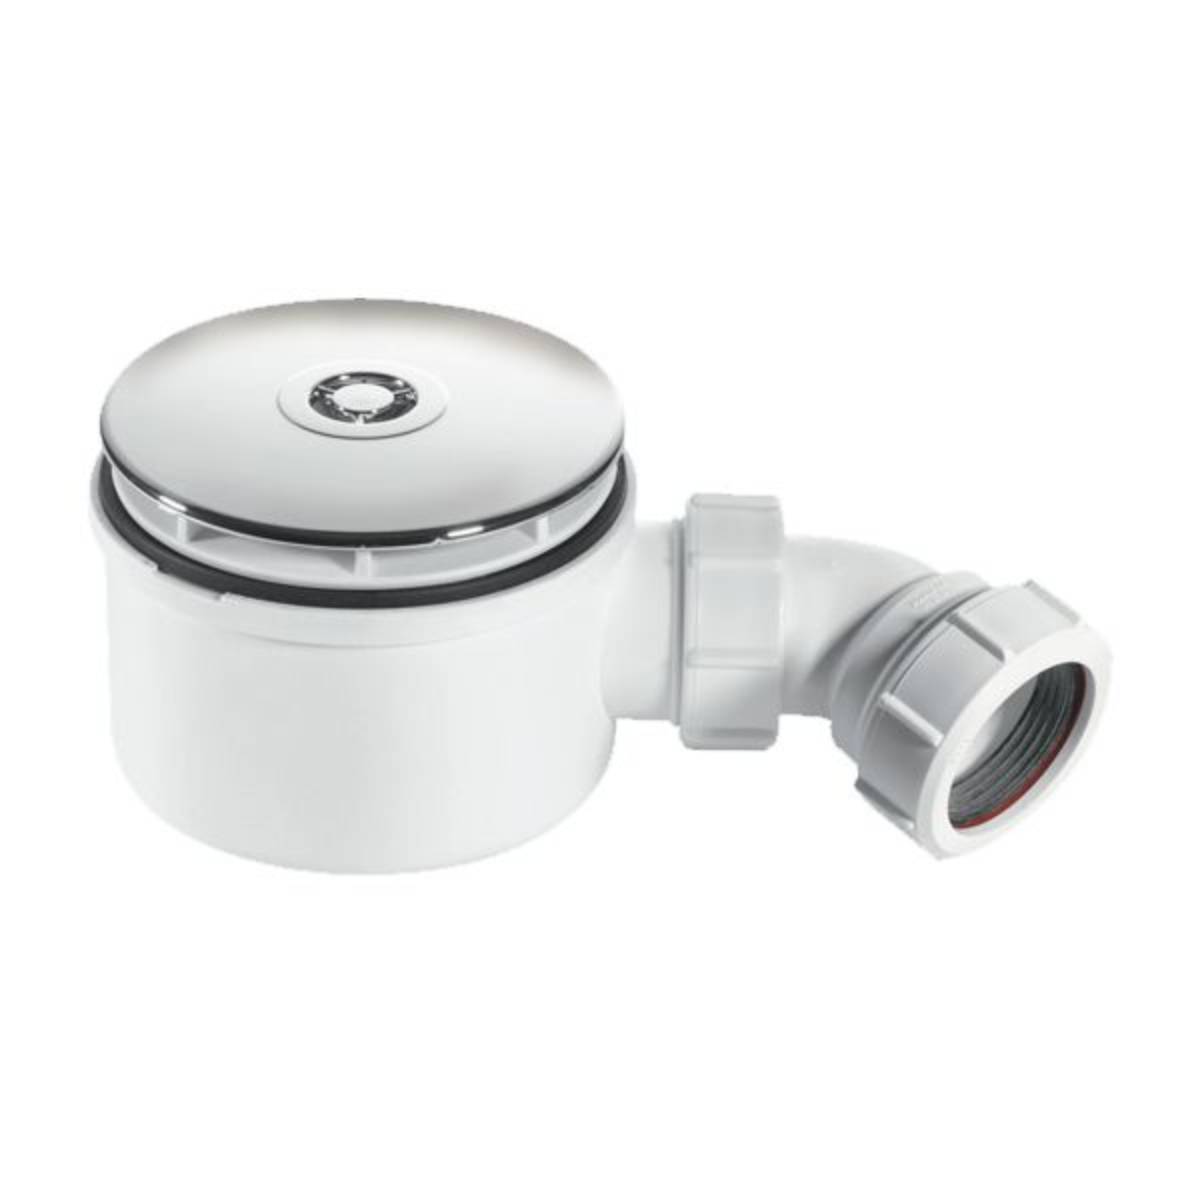 McAlpine 90mm Chrome Easy Clean Shower Trap (7723) Image